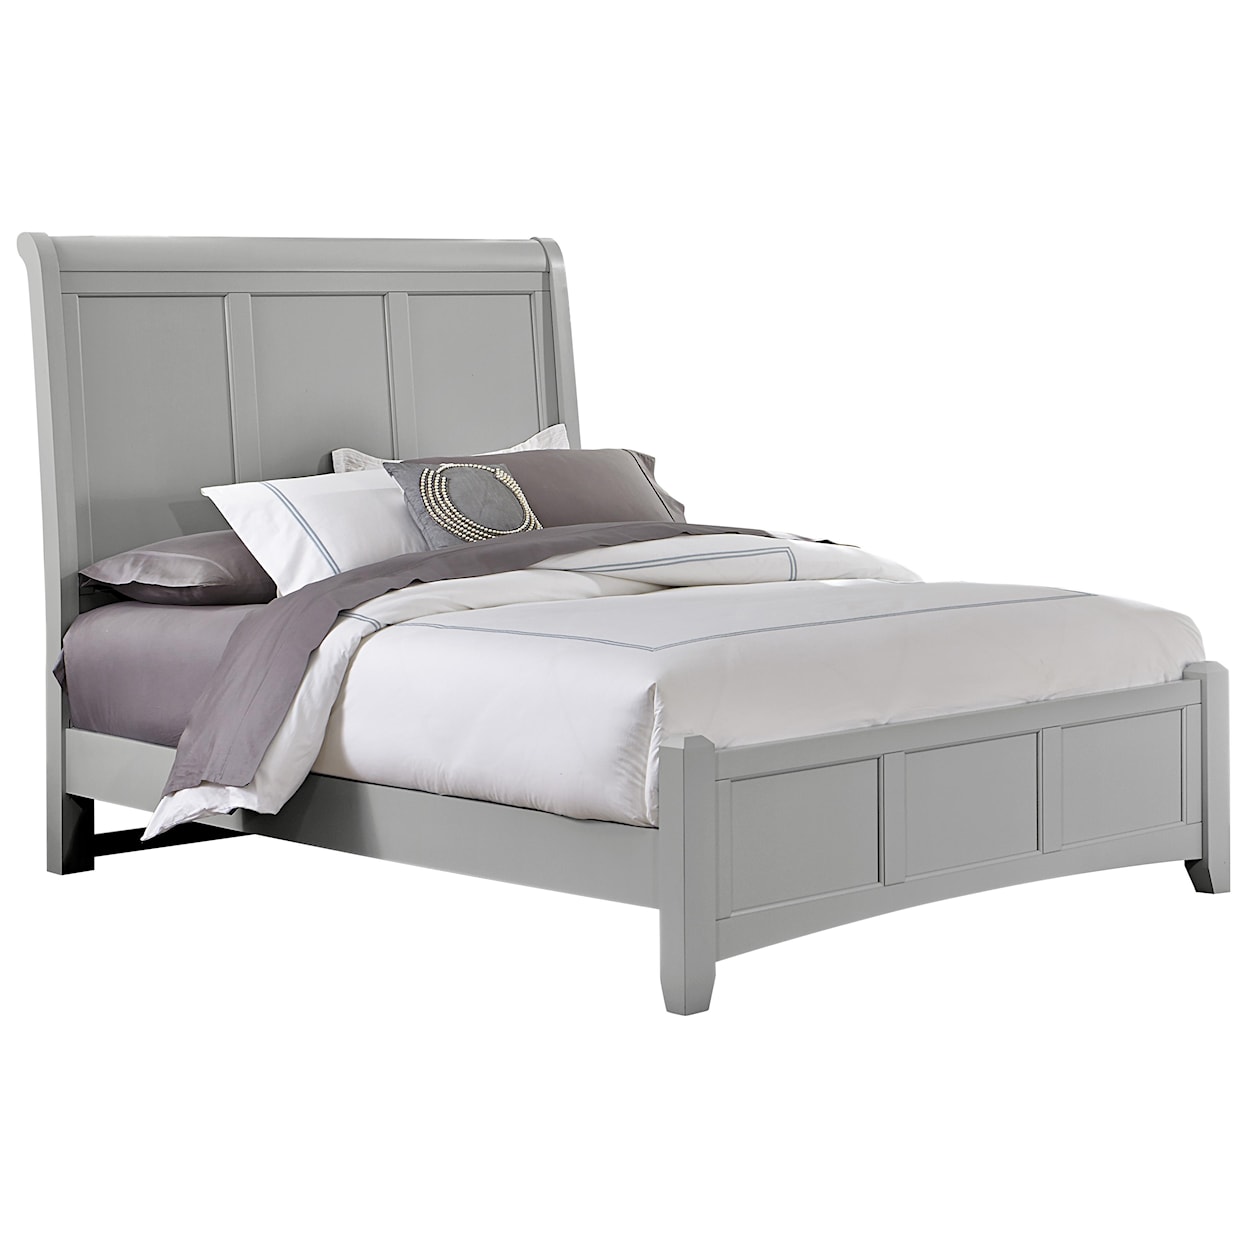 Vaughan Bassett Bonanza King Sleigh Bed with Low Profile Footboard